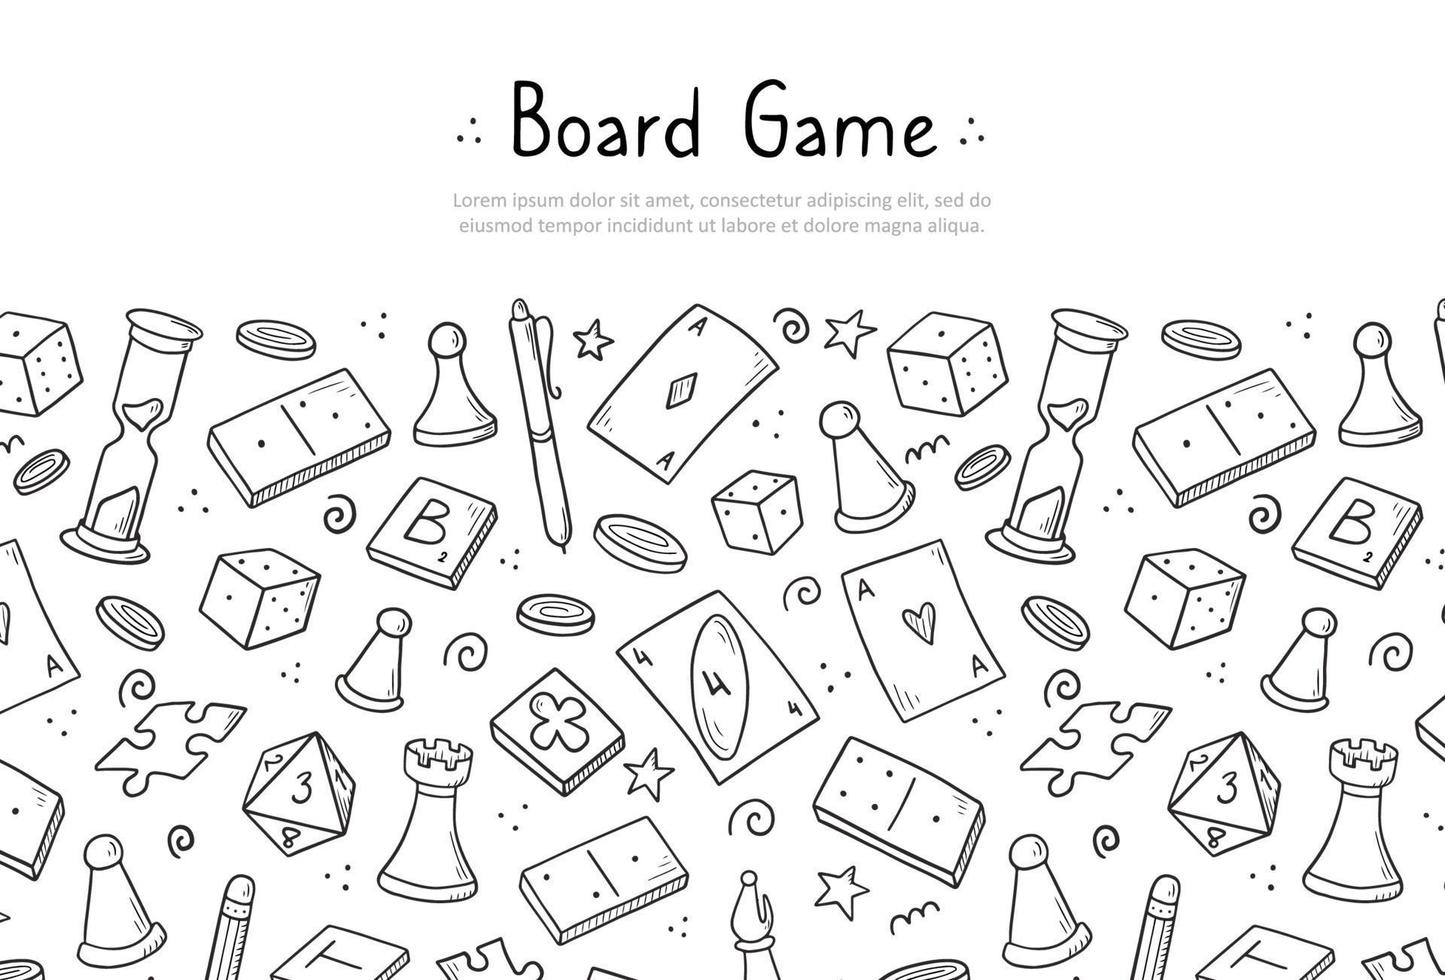 Hand drawn banner template of board game vector